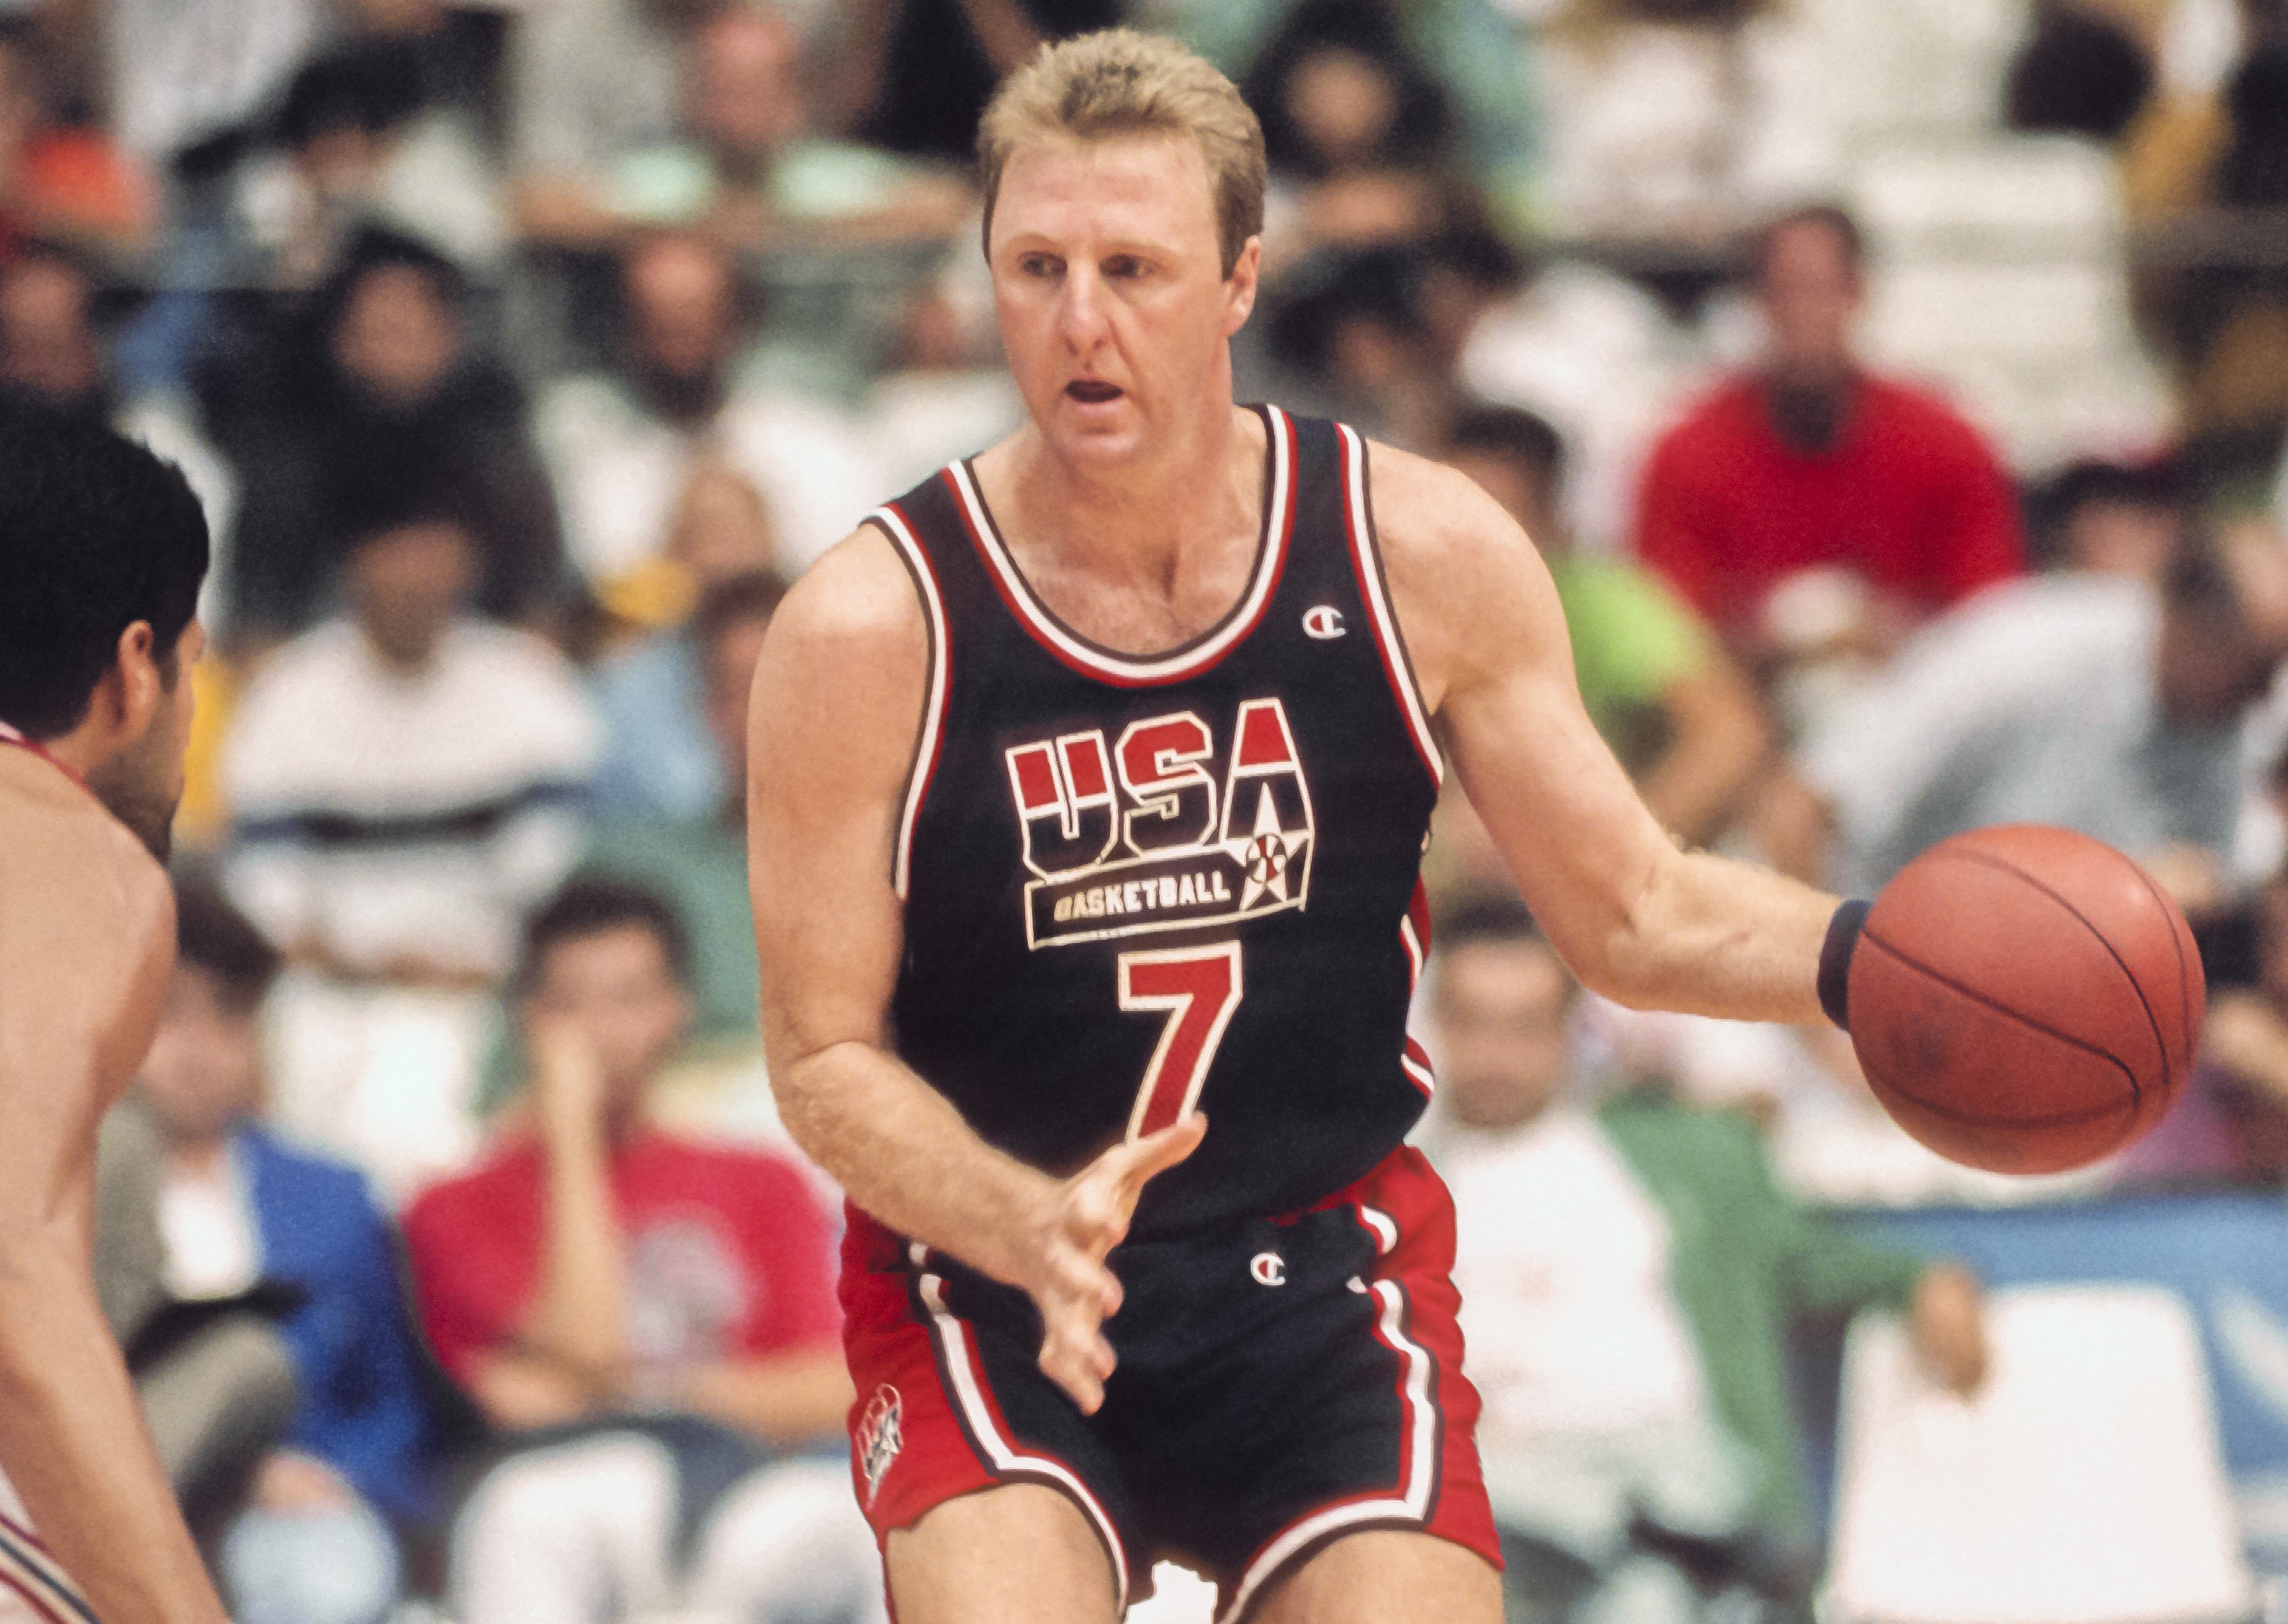 Larry Bird of the United States Olympic basketball team, known as The Dream Team, plays in a quarterfinal game against Puerto Rico.